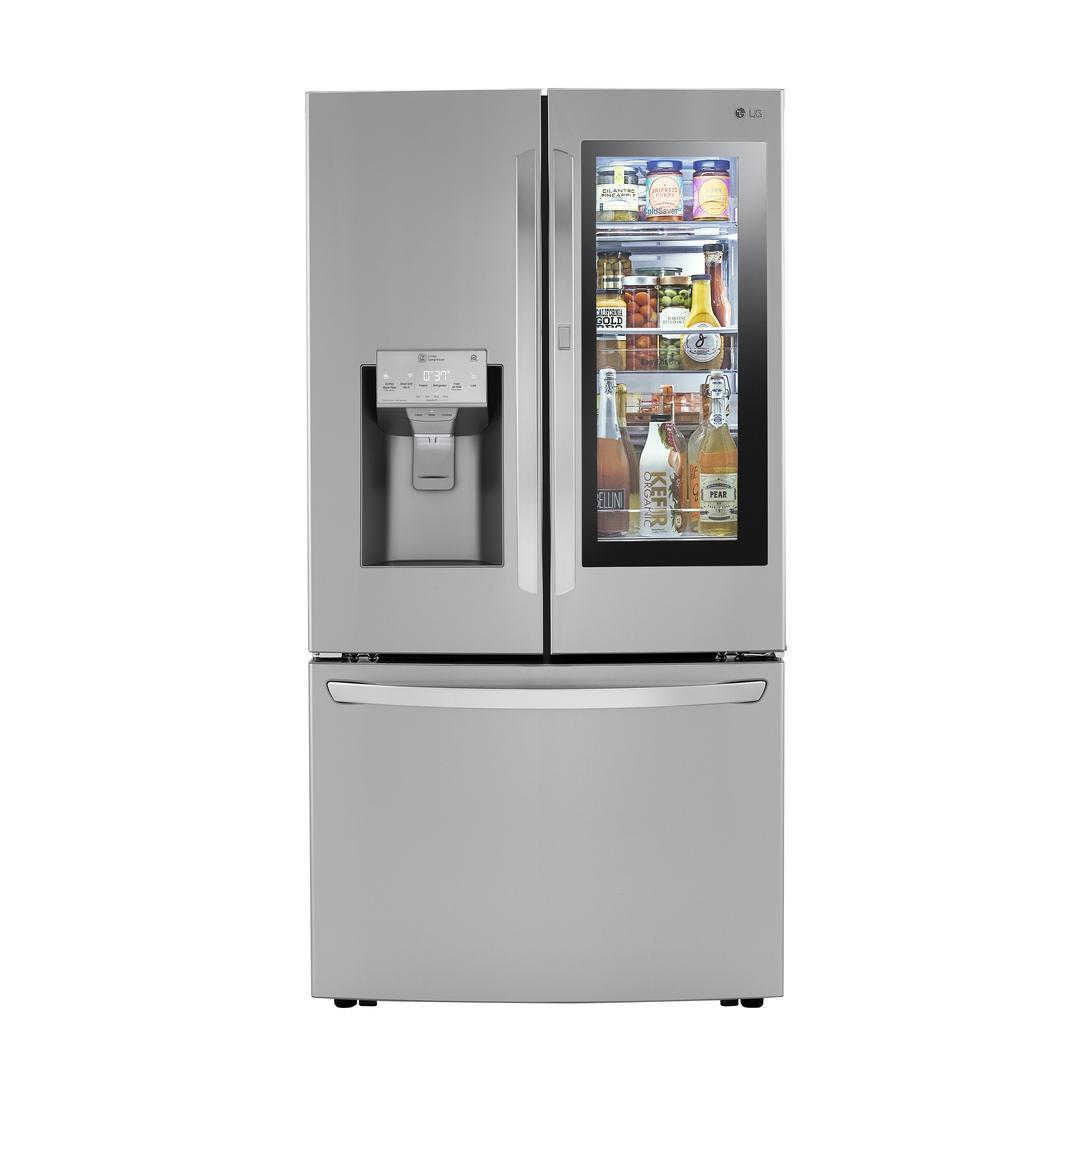 LG - 35.8 Inch 23.5 cu. ft French Door Refrigerator in Stainless - LRFVC2406S